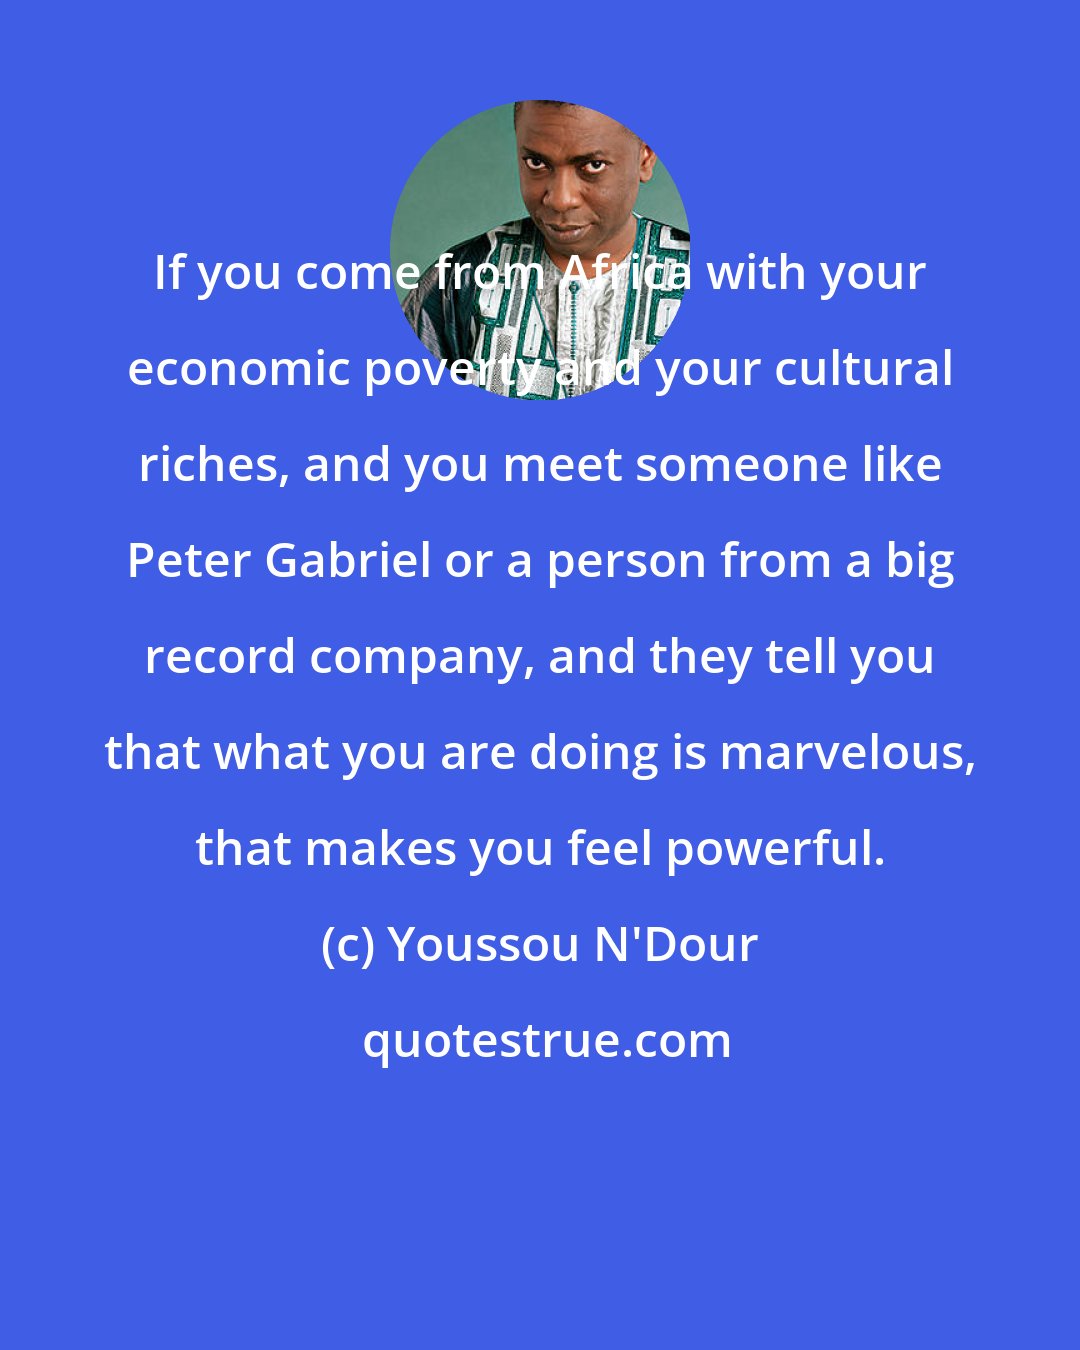 Youssou N'Dour: If you come from Africa with your economic poverty and your cultural riches, and you meet someone like Peter Gabriel or a person from a big record company, and they tell you that what you are doing is marvelous, that makes you feel powerful.